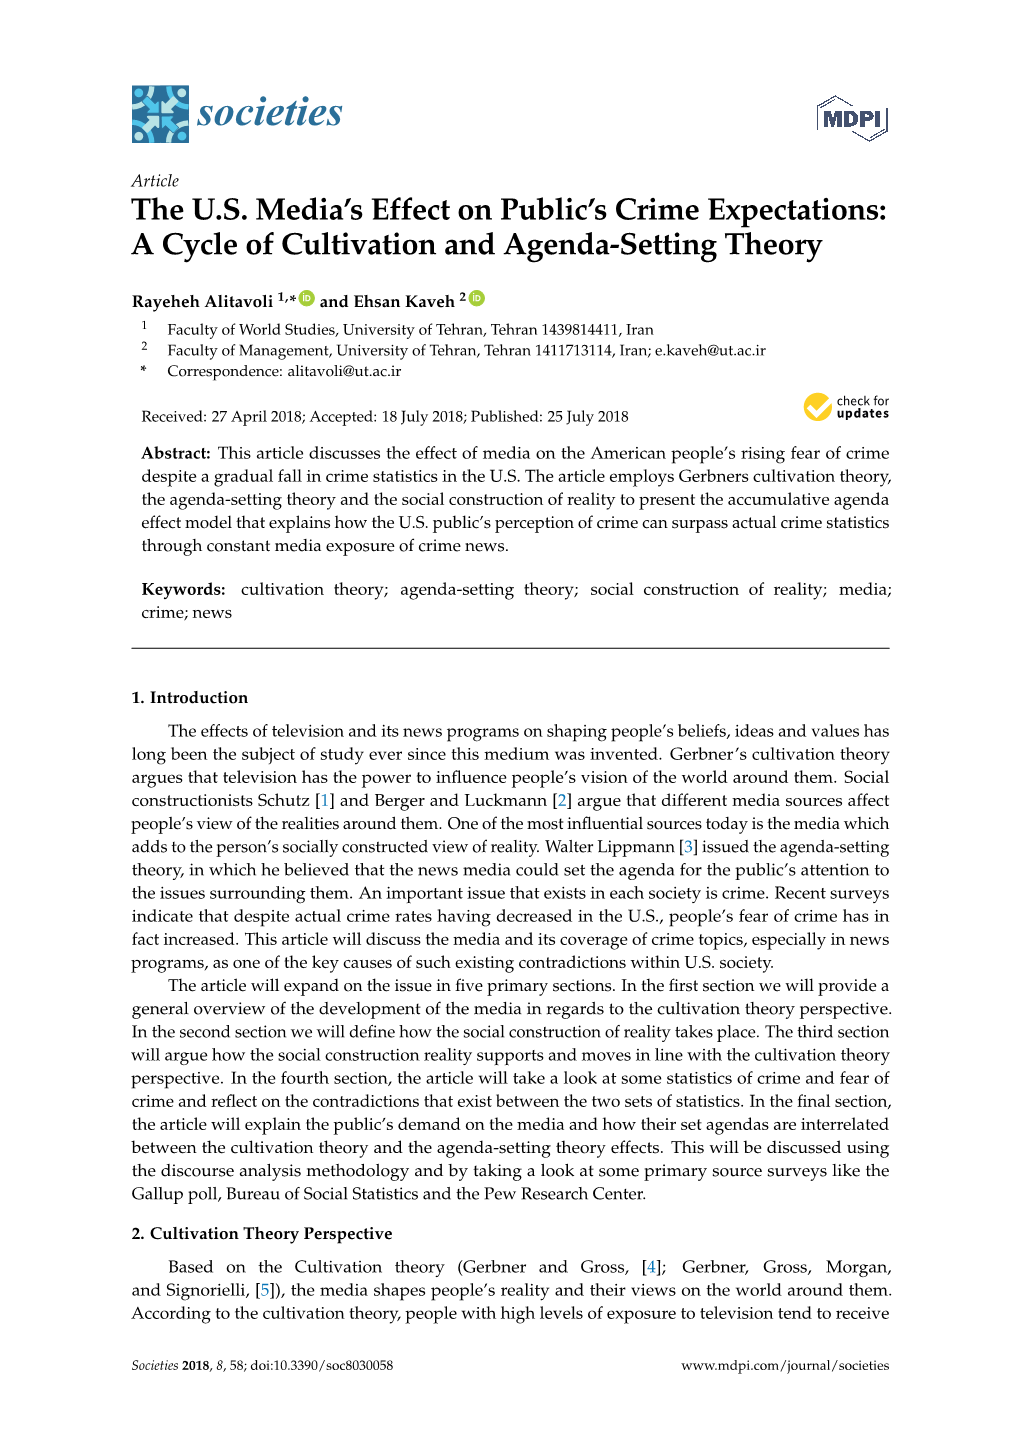 A Cycle of Cultivation and Agenda-Setting Theory